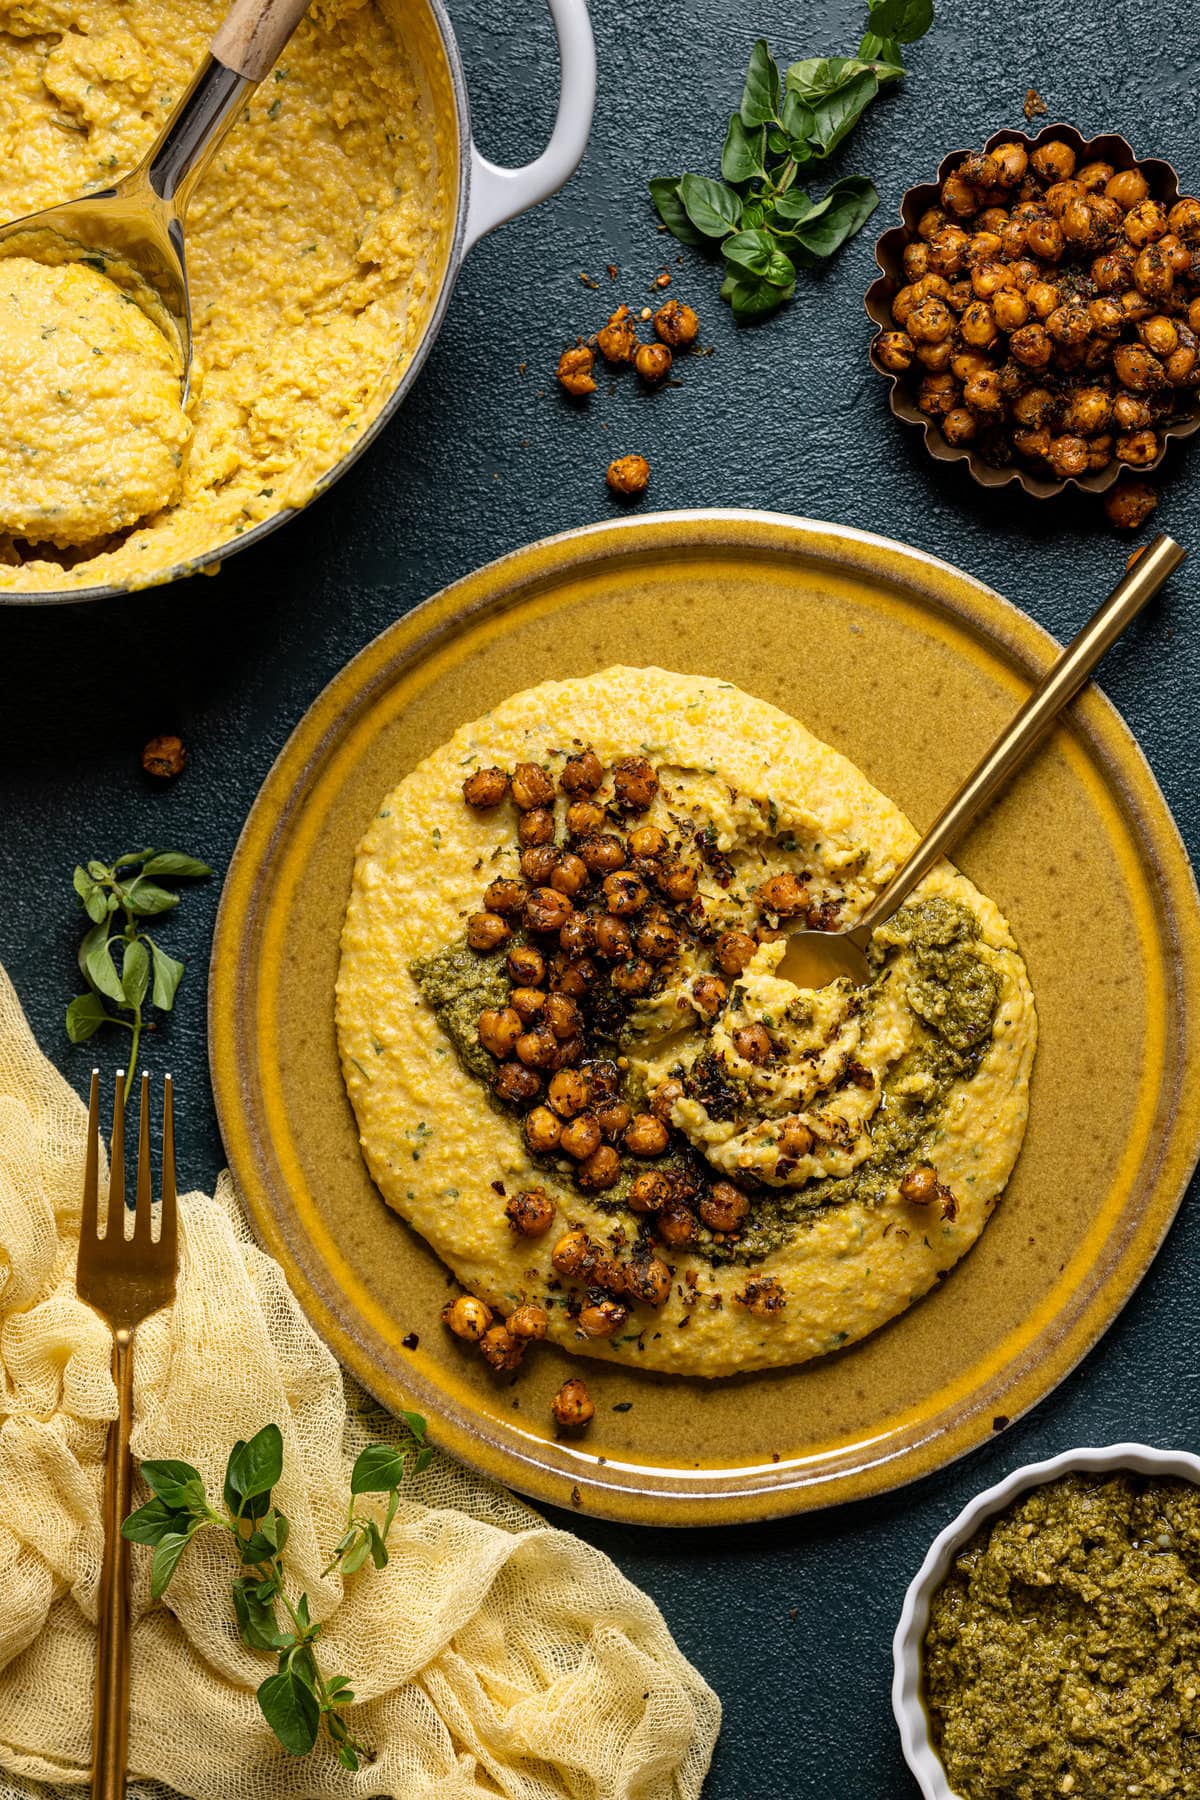 Overhead shot of a plate of Vegan Cheese Polenta with Pesto and Chickpea